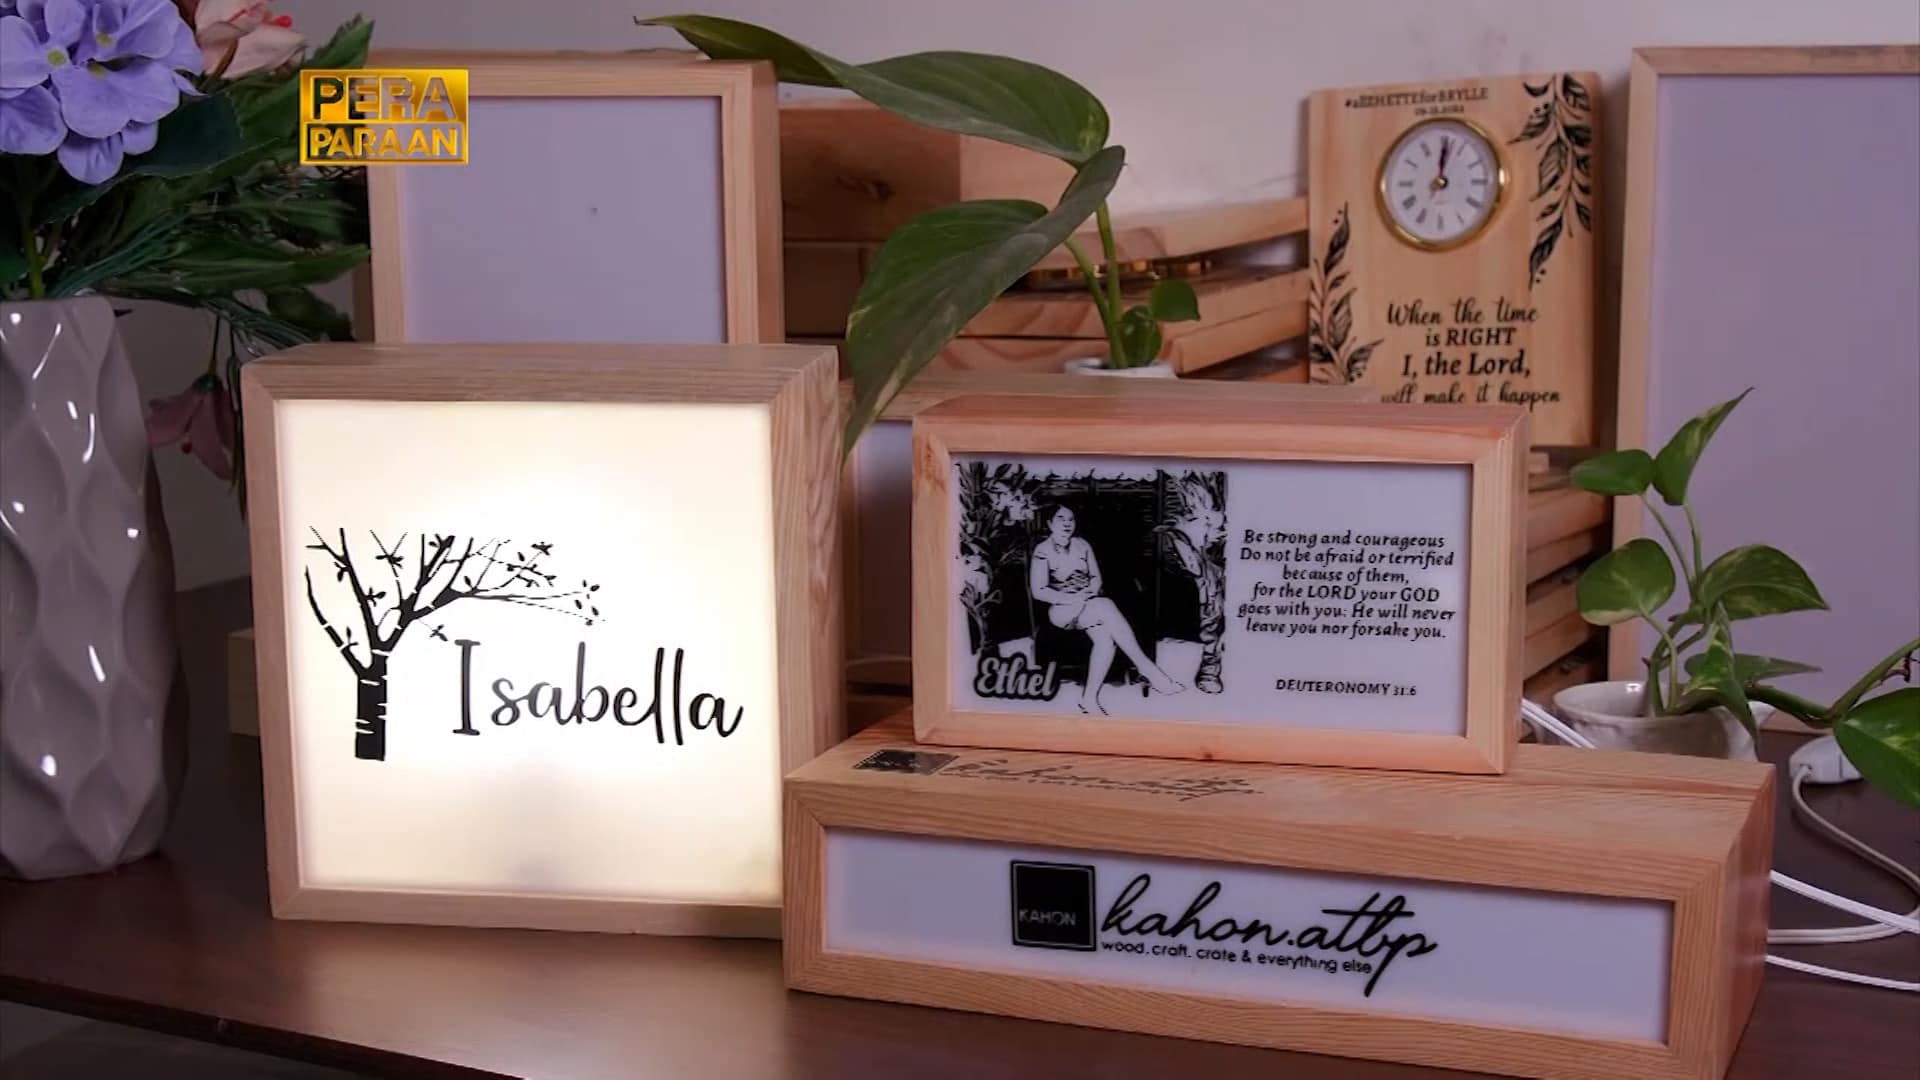 Entrepreneur Who Closed Business Due To Pandemic Begins Anew With Wooden Product Business